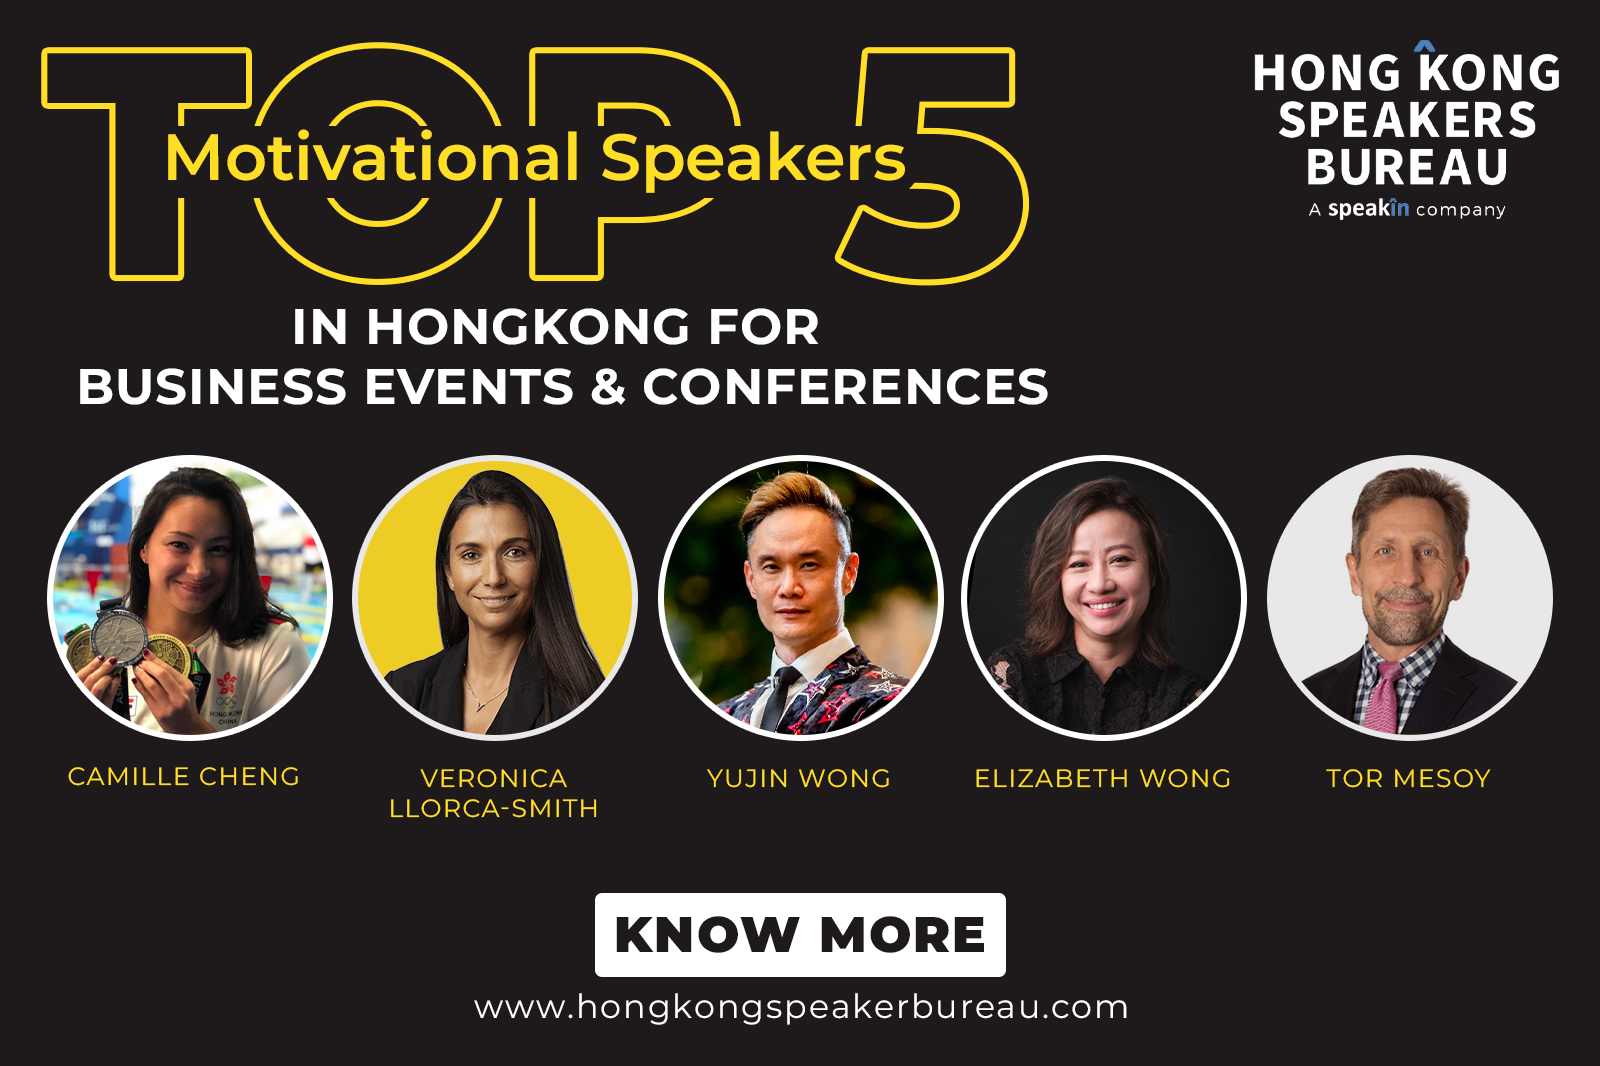 Top 5 Motivational Speakers in Hongkong for Business Events & Conferences